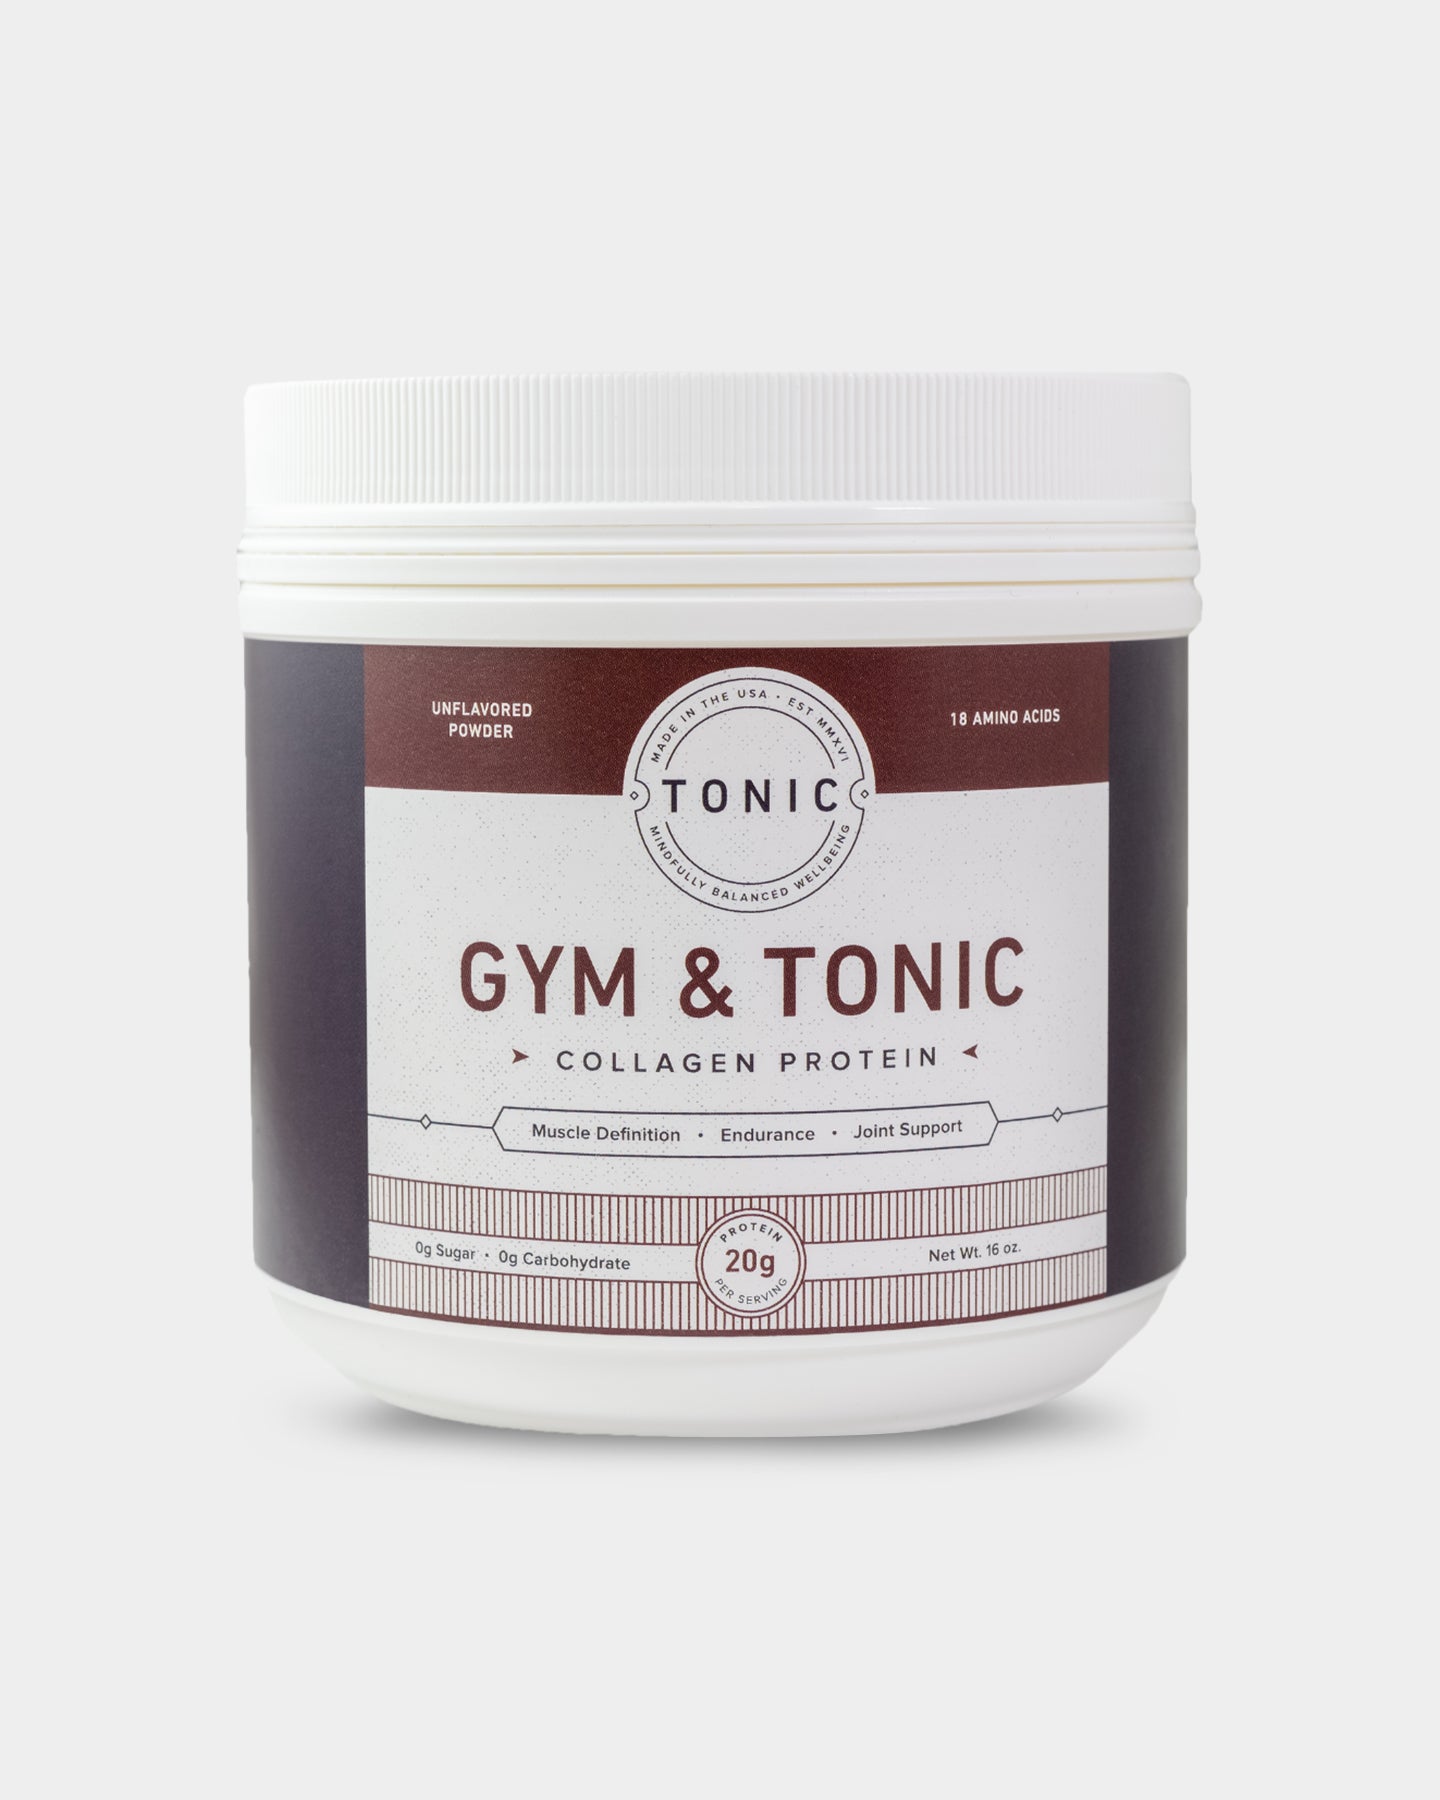 Image of Gym & Tonic Collagen Protein